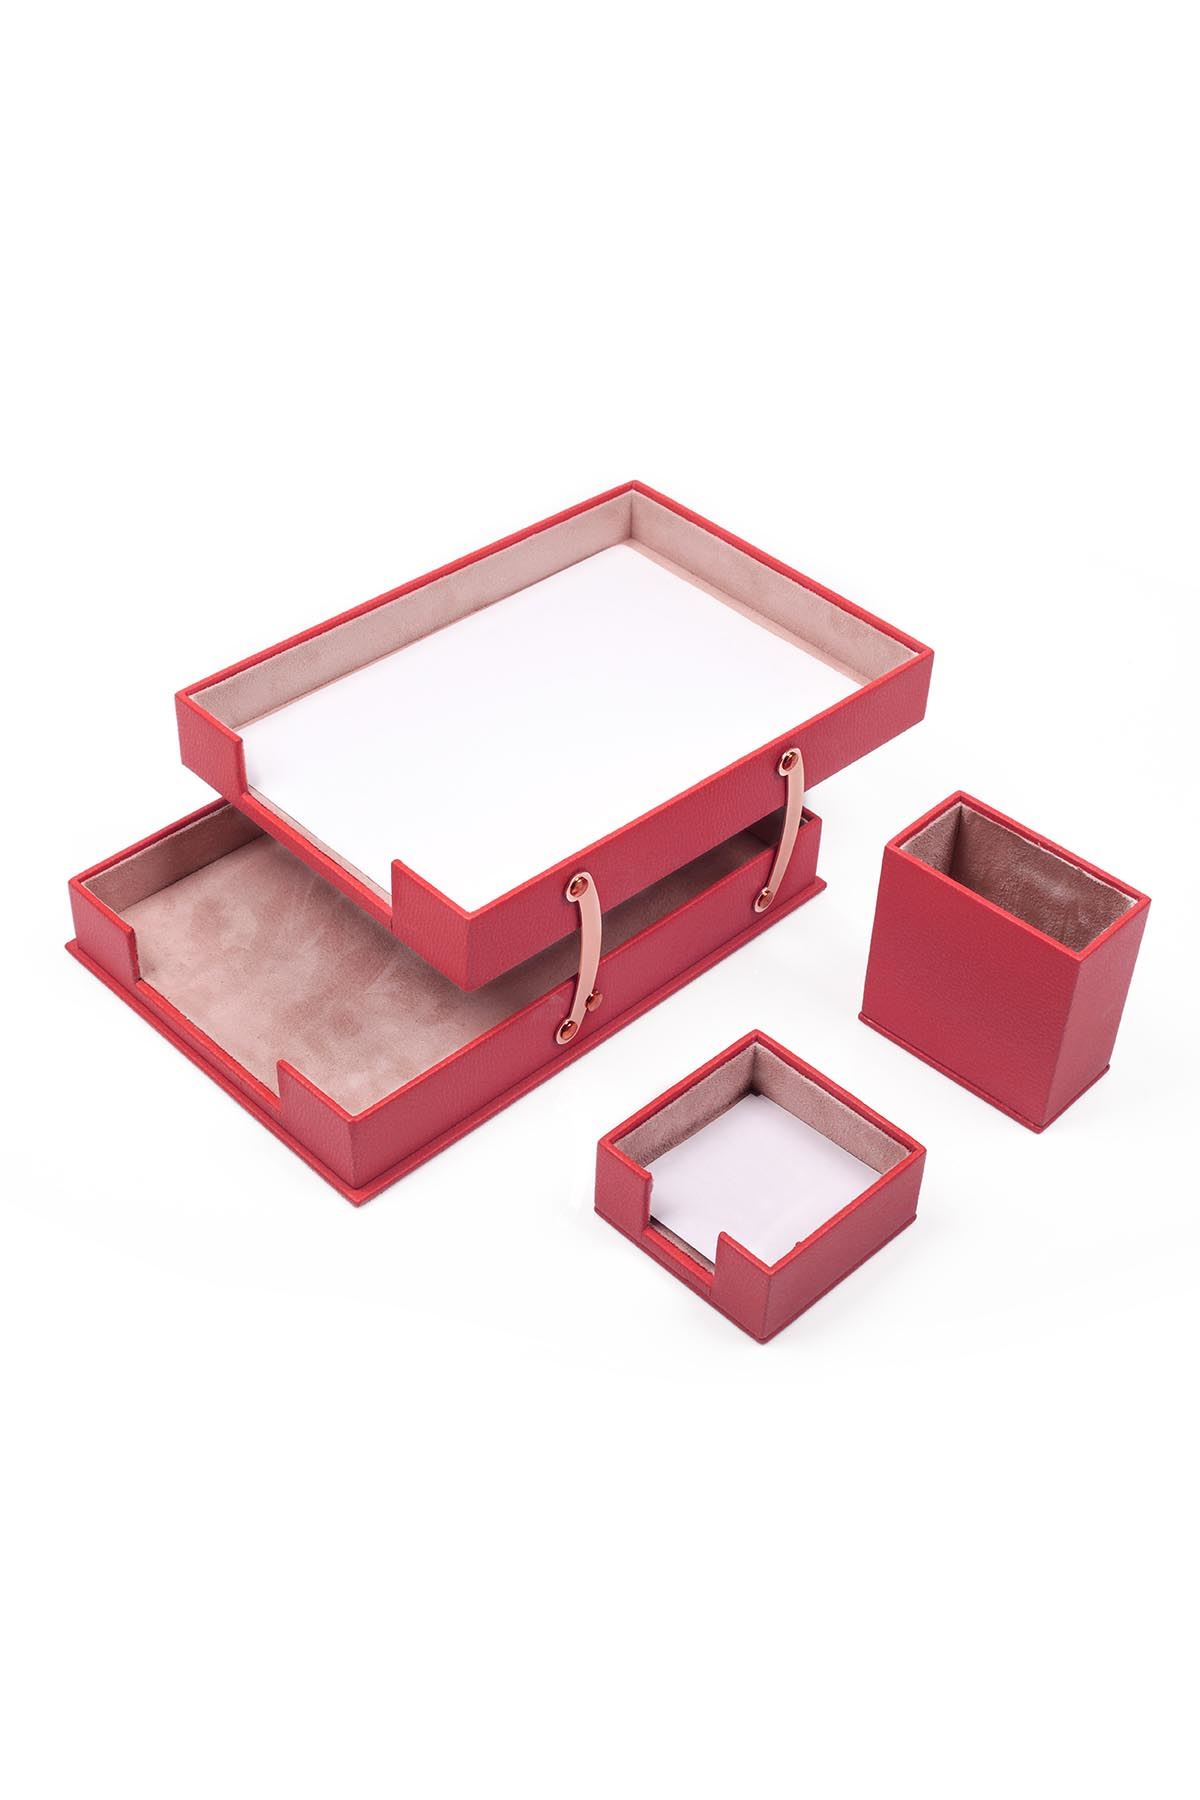 Double Document Tray With 2 Accessories Red| Desk Set Accessories | Desktop Accessories | Desk Accessories | Desk Organizers